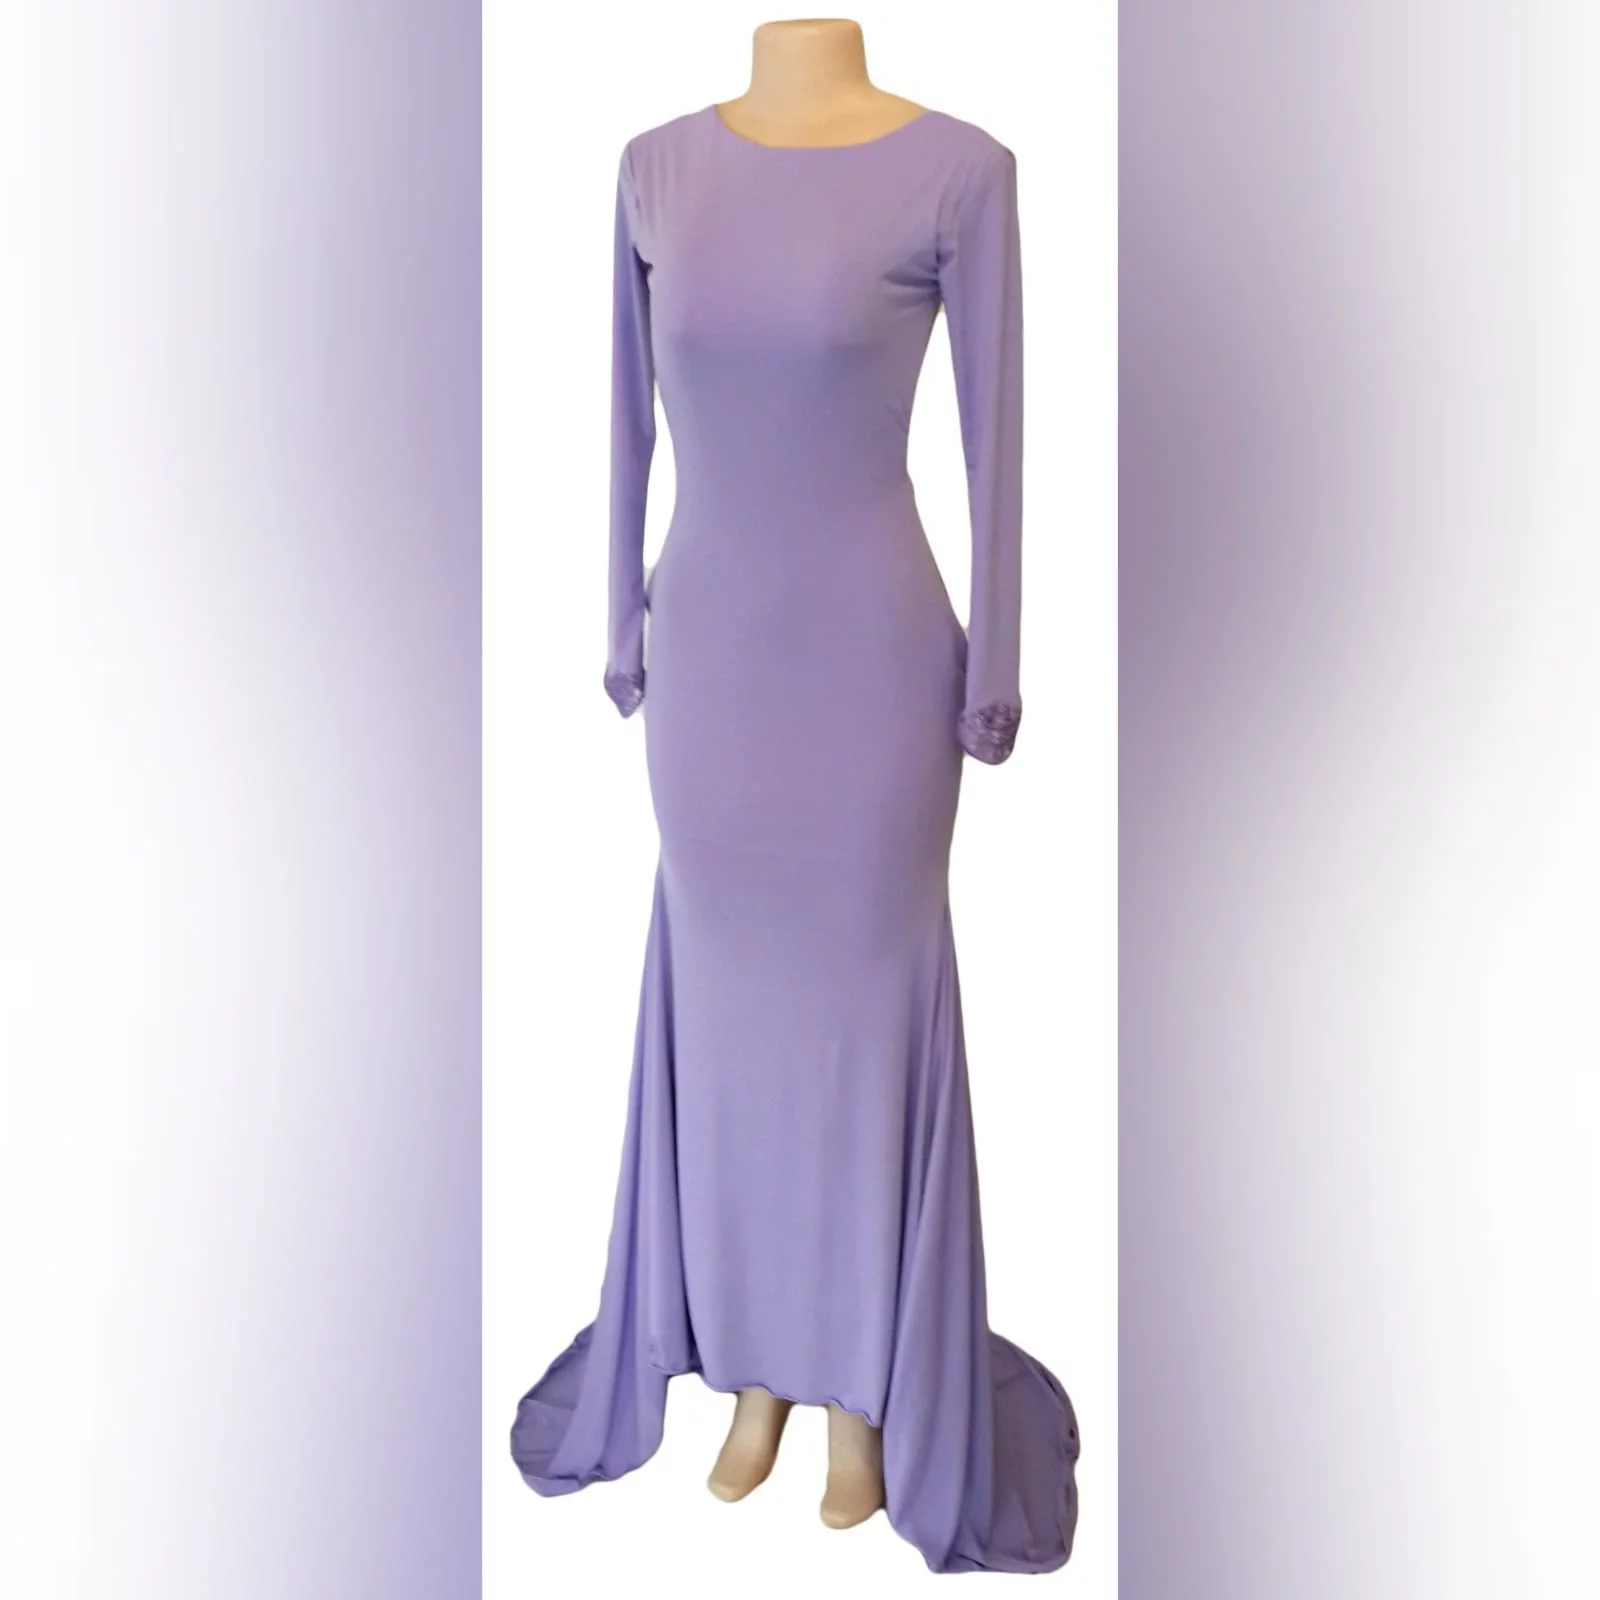 Body fitting lilac soft mermaid matric farewell dress and a jewel neckline 4 body fitting lilac soft memaid matric farewell dress and a jewel neckline. Low open square back. With a train and long sleeves. Sleeves finished with lace.